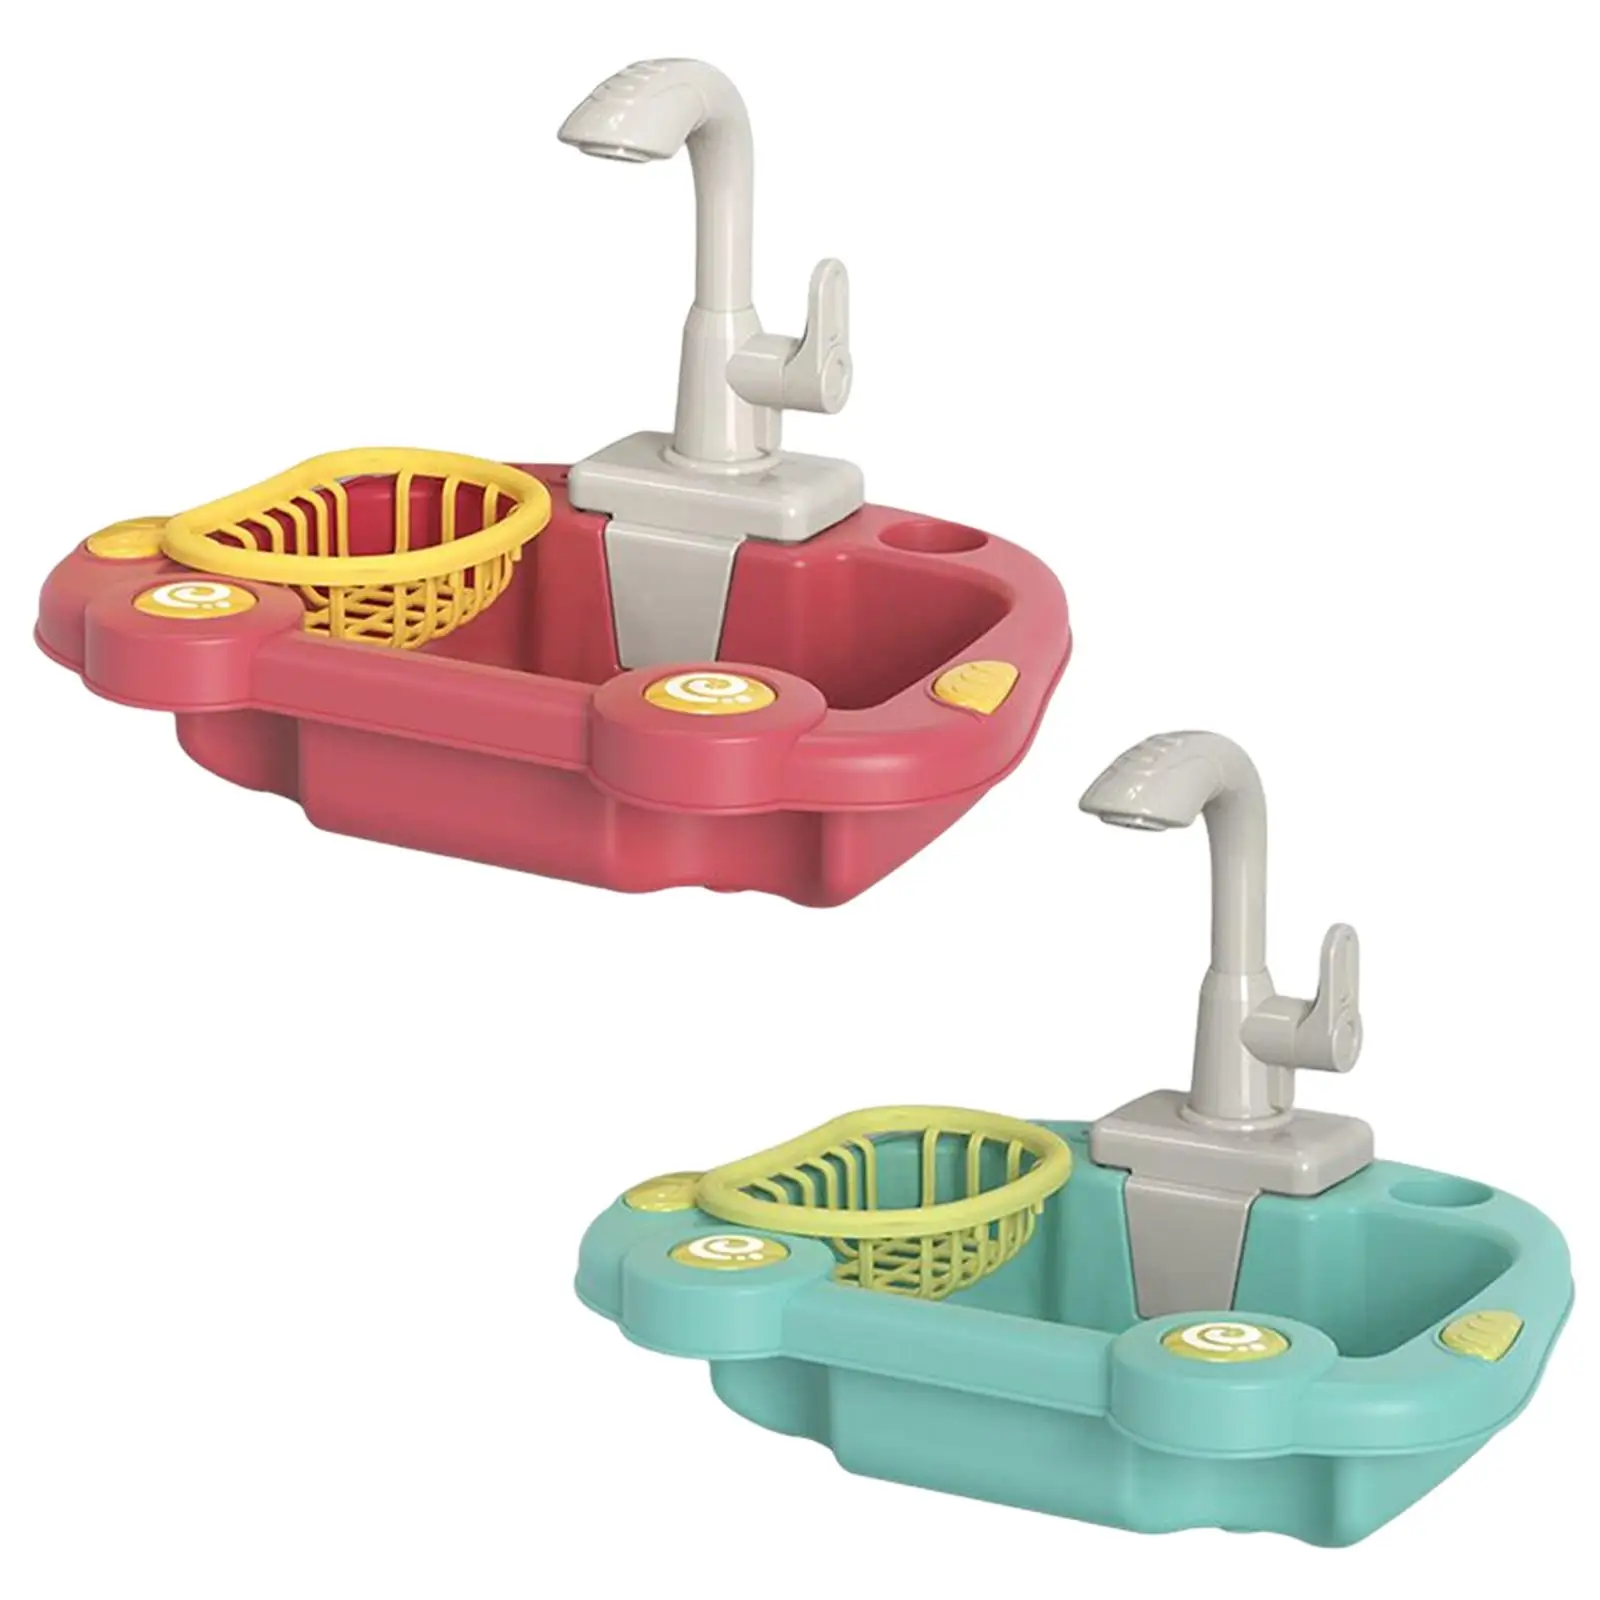 Kitchen Sink Toy Running Water Working Faucet Play Set Dishes 7L kid